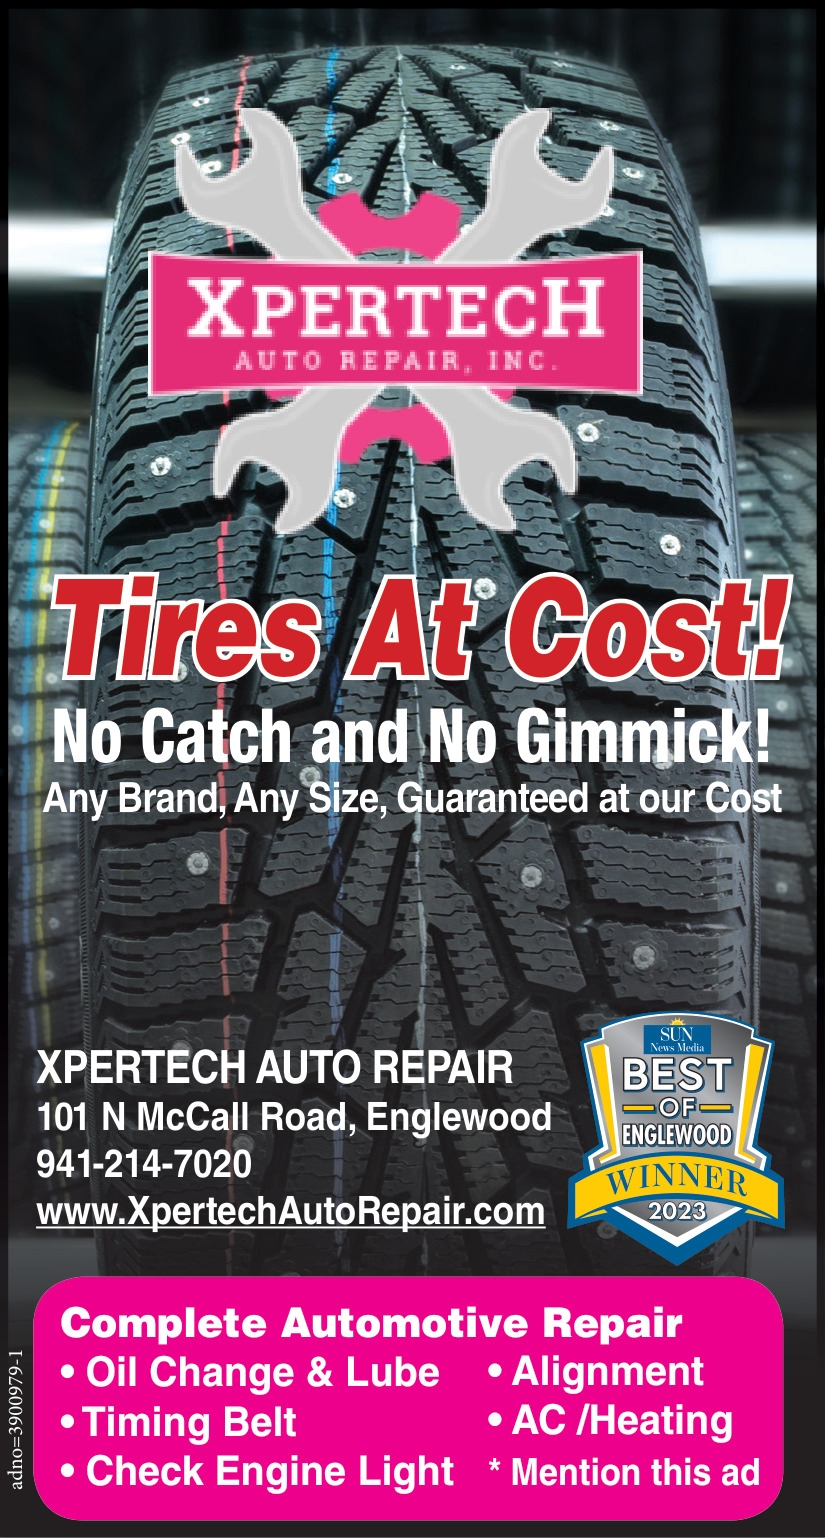 Tires At Cost!